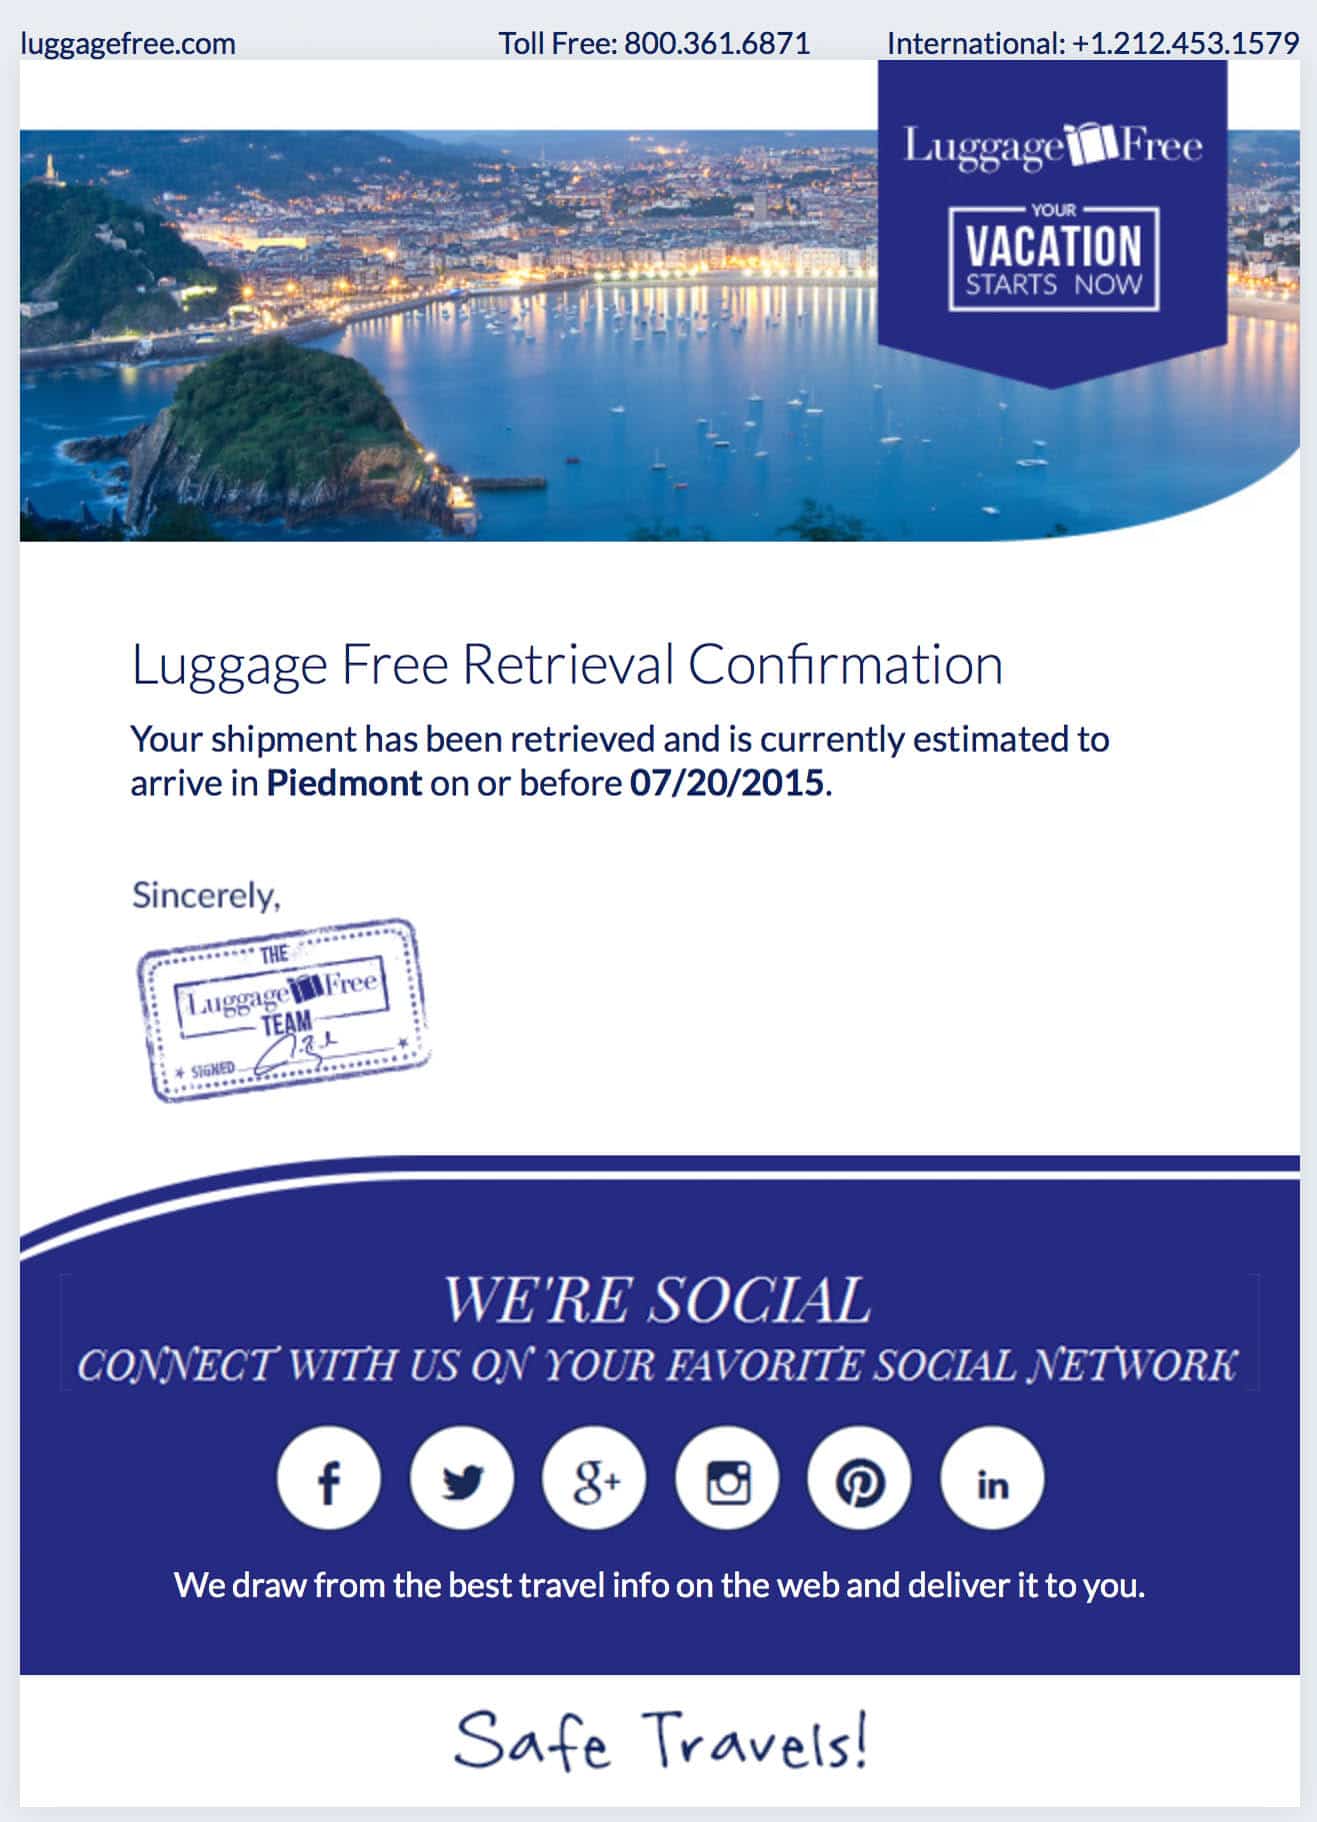 luggage-free-confirmation-page